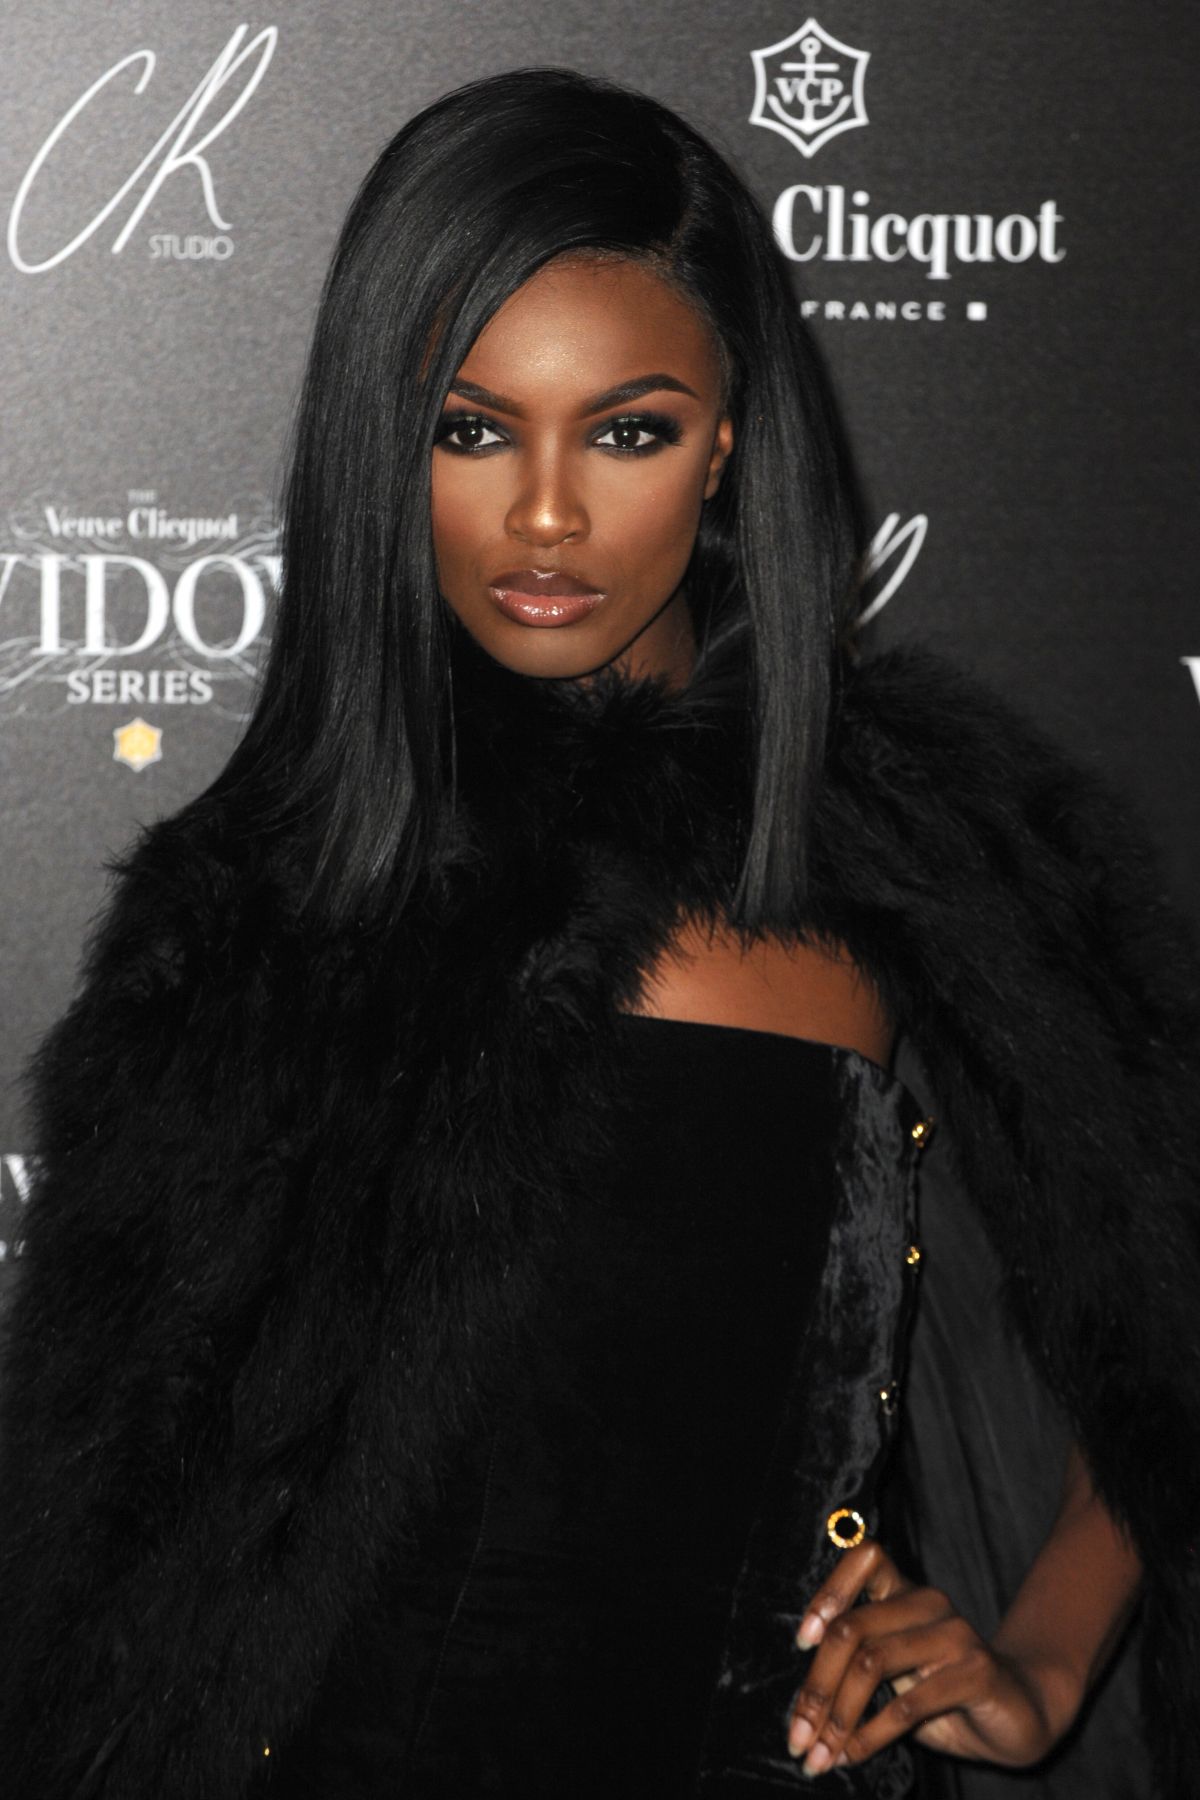 leomie-anderson-at-veuve-clicquot-widow-series-vip-launch-party-in-london-10-19-2017-9